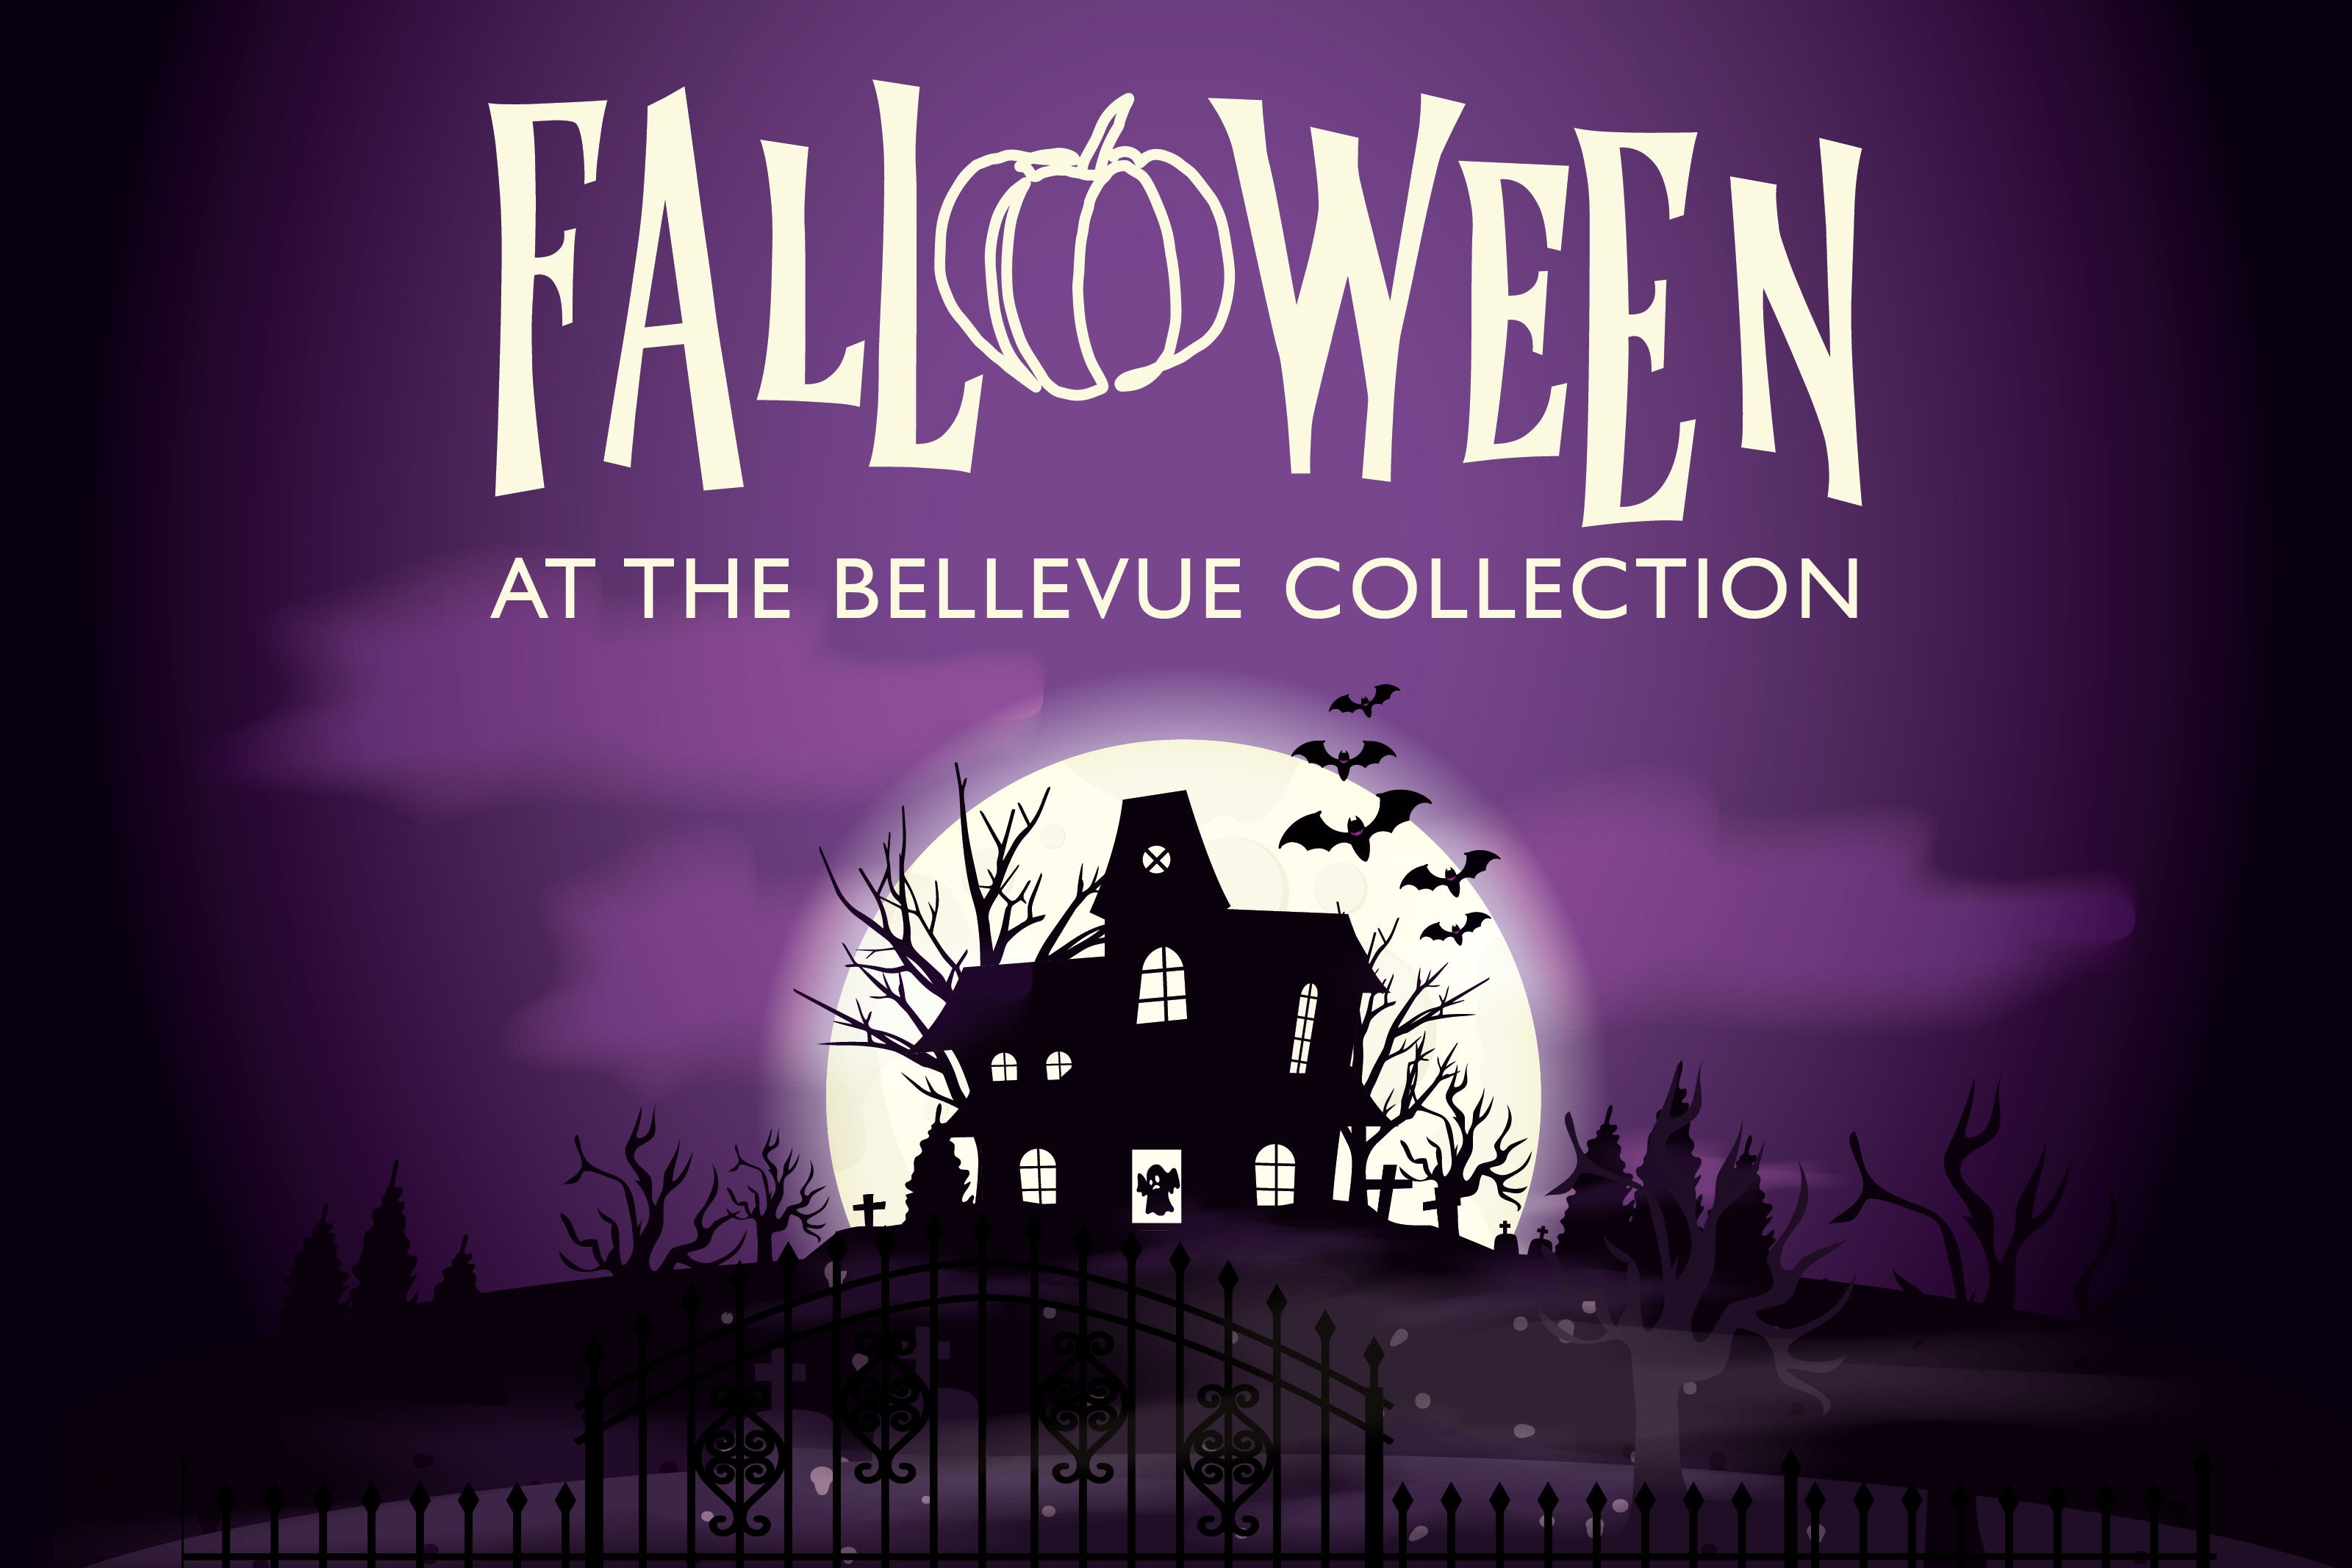 Falloween at The Bellevue Collection